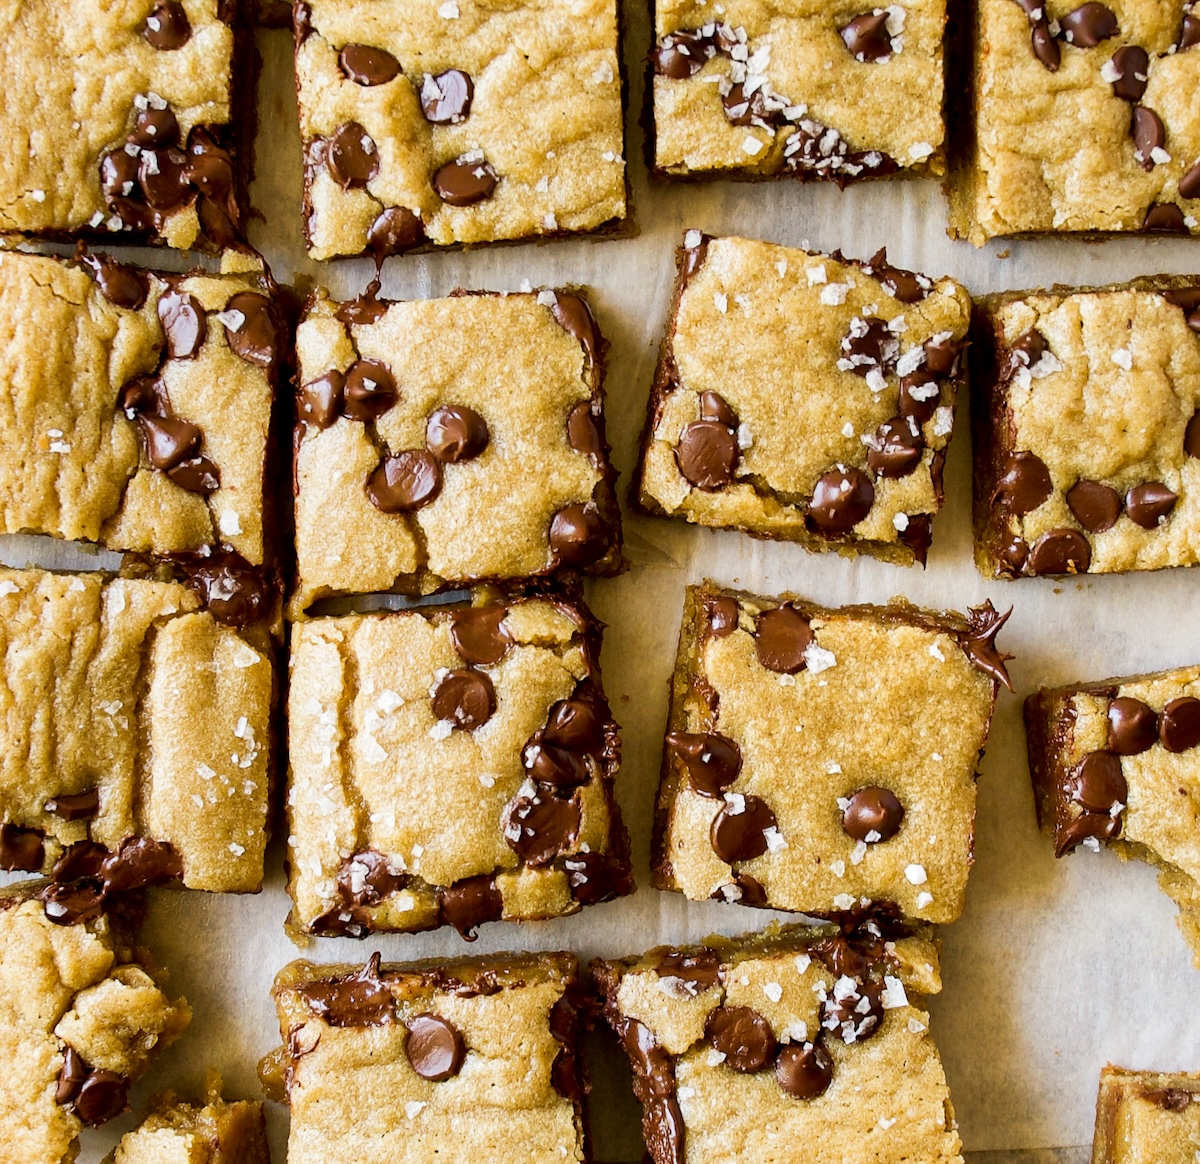 A bunch of pieces of brown butter blondie with chocolate chips and sea salt flakes.